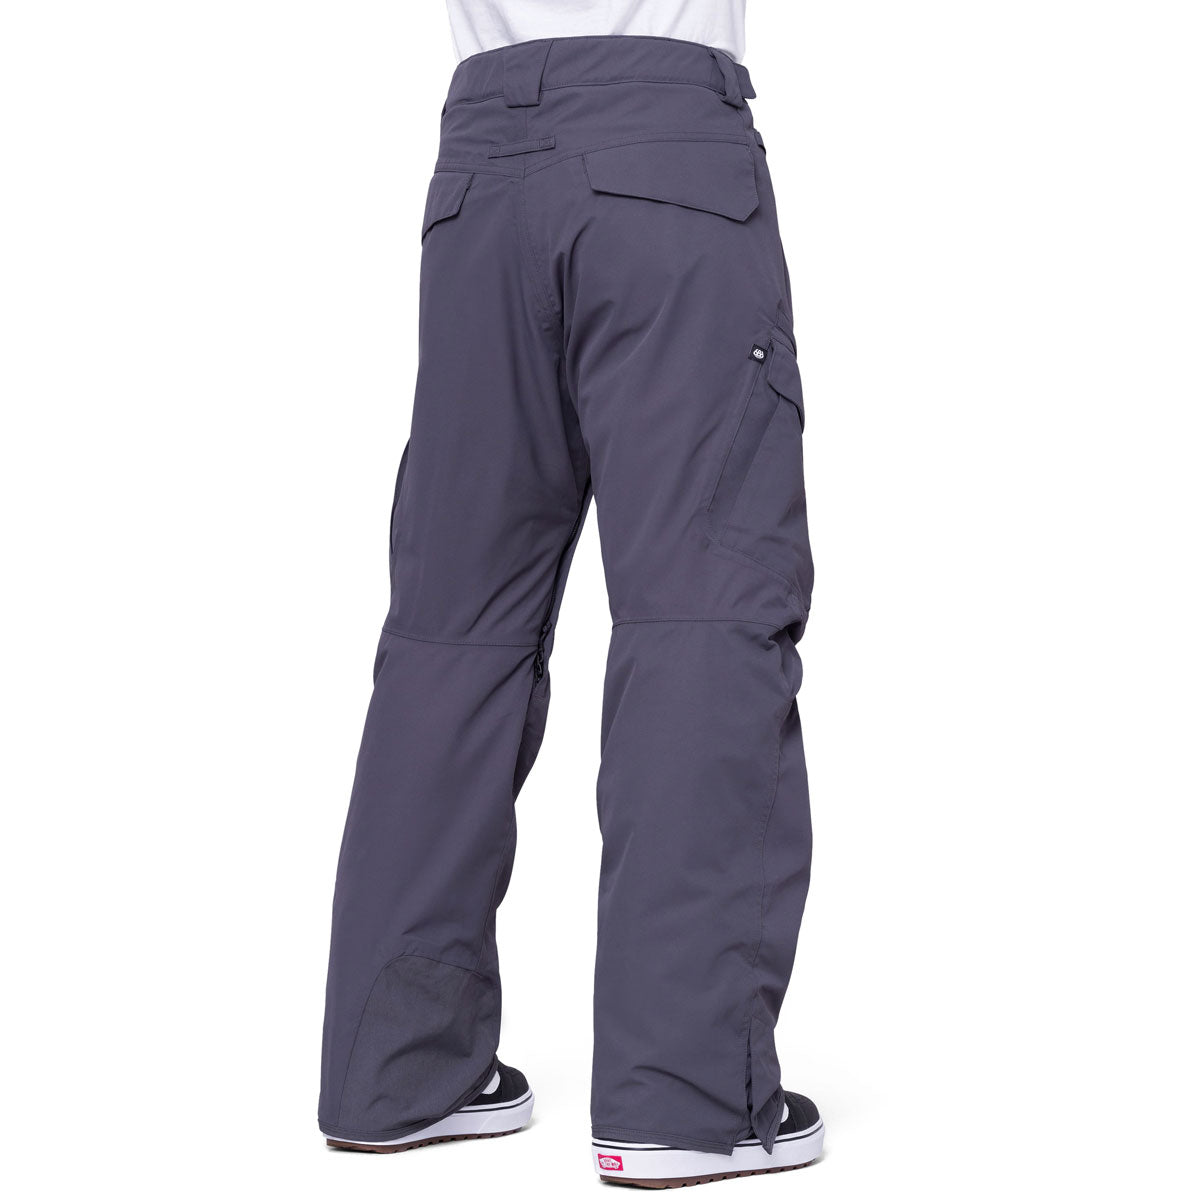 686 Men's Smarty 3-In-1 Cargo Snowboard Pants - Charcoal image 2